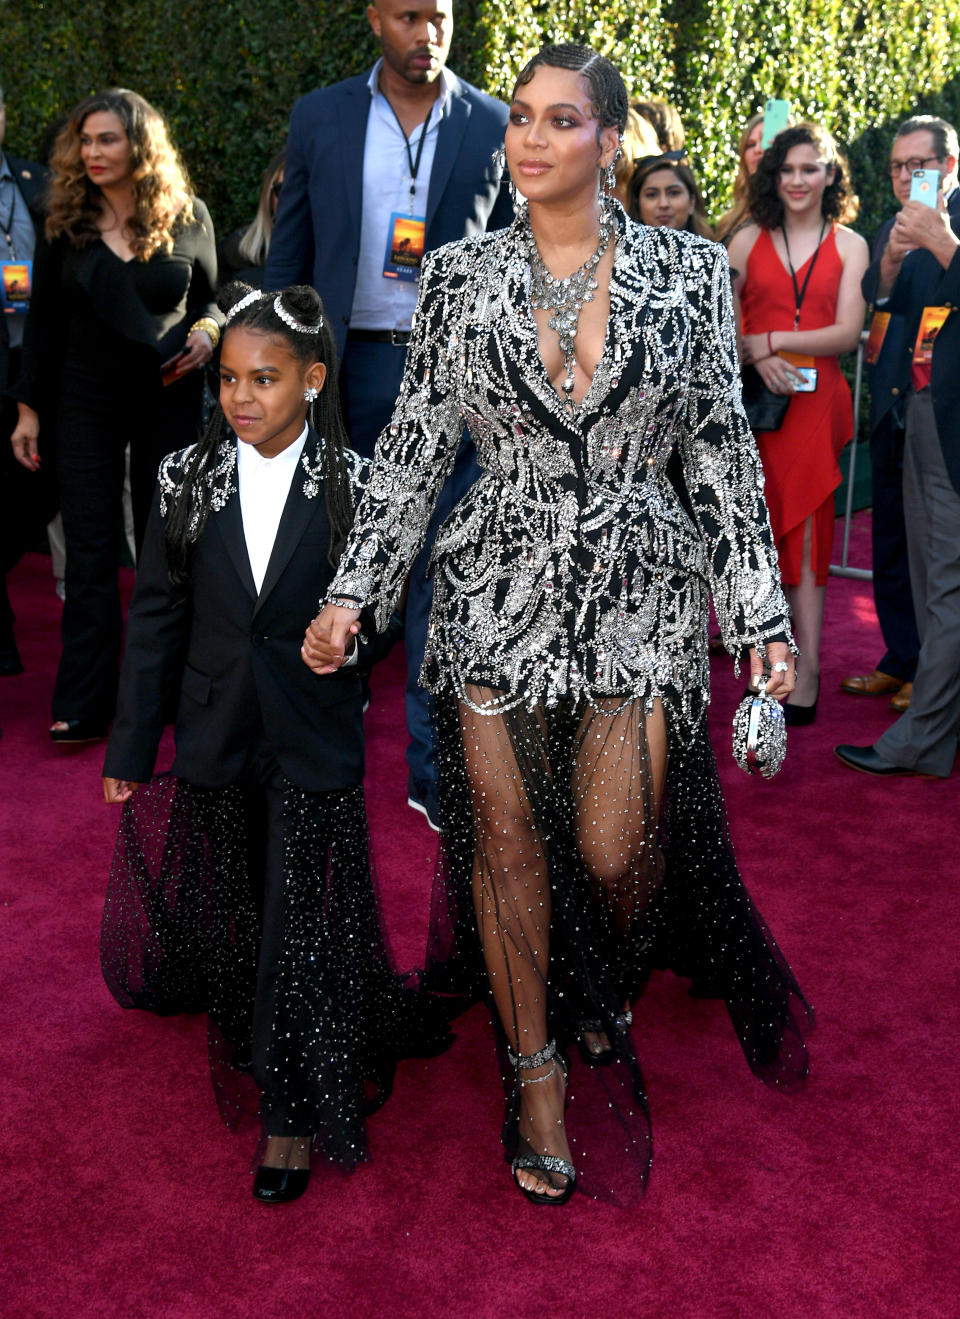 HOLLYWOOD, CALIFORNIA - JULY 09: (L-R) Blue Ivy Carter and Beyoncé attends the premiere of Disney's "The Lion King" at Dolby Theatre on July 09, 2019 in Hollywood, California. (Photo by Kevin Winter/Getty Images)